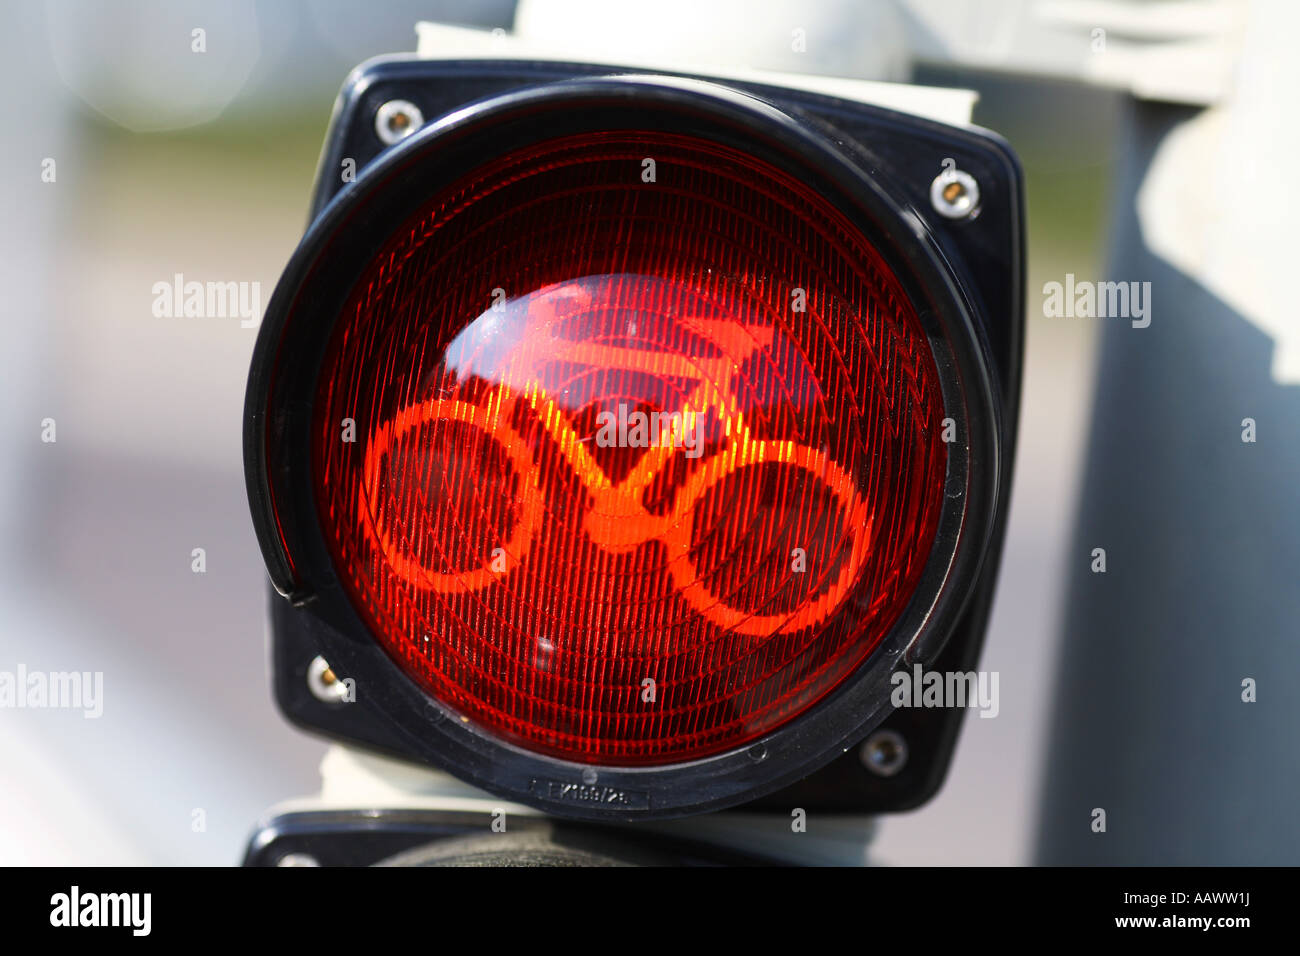 Red light for bikers Stock Photo